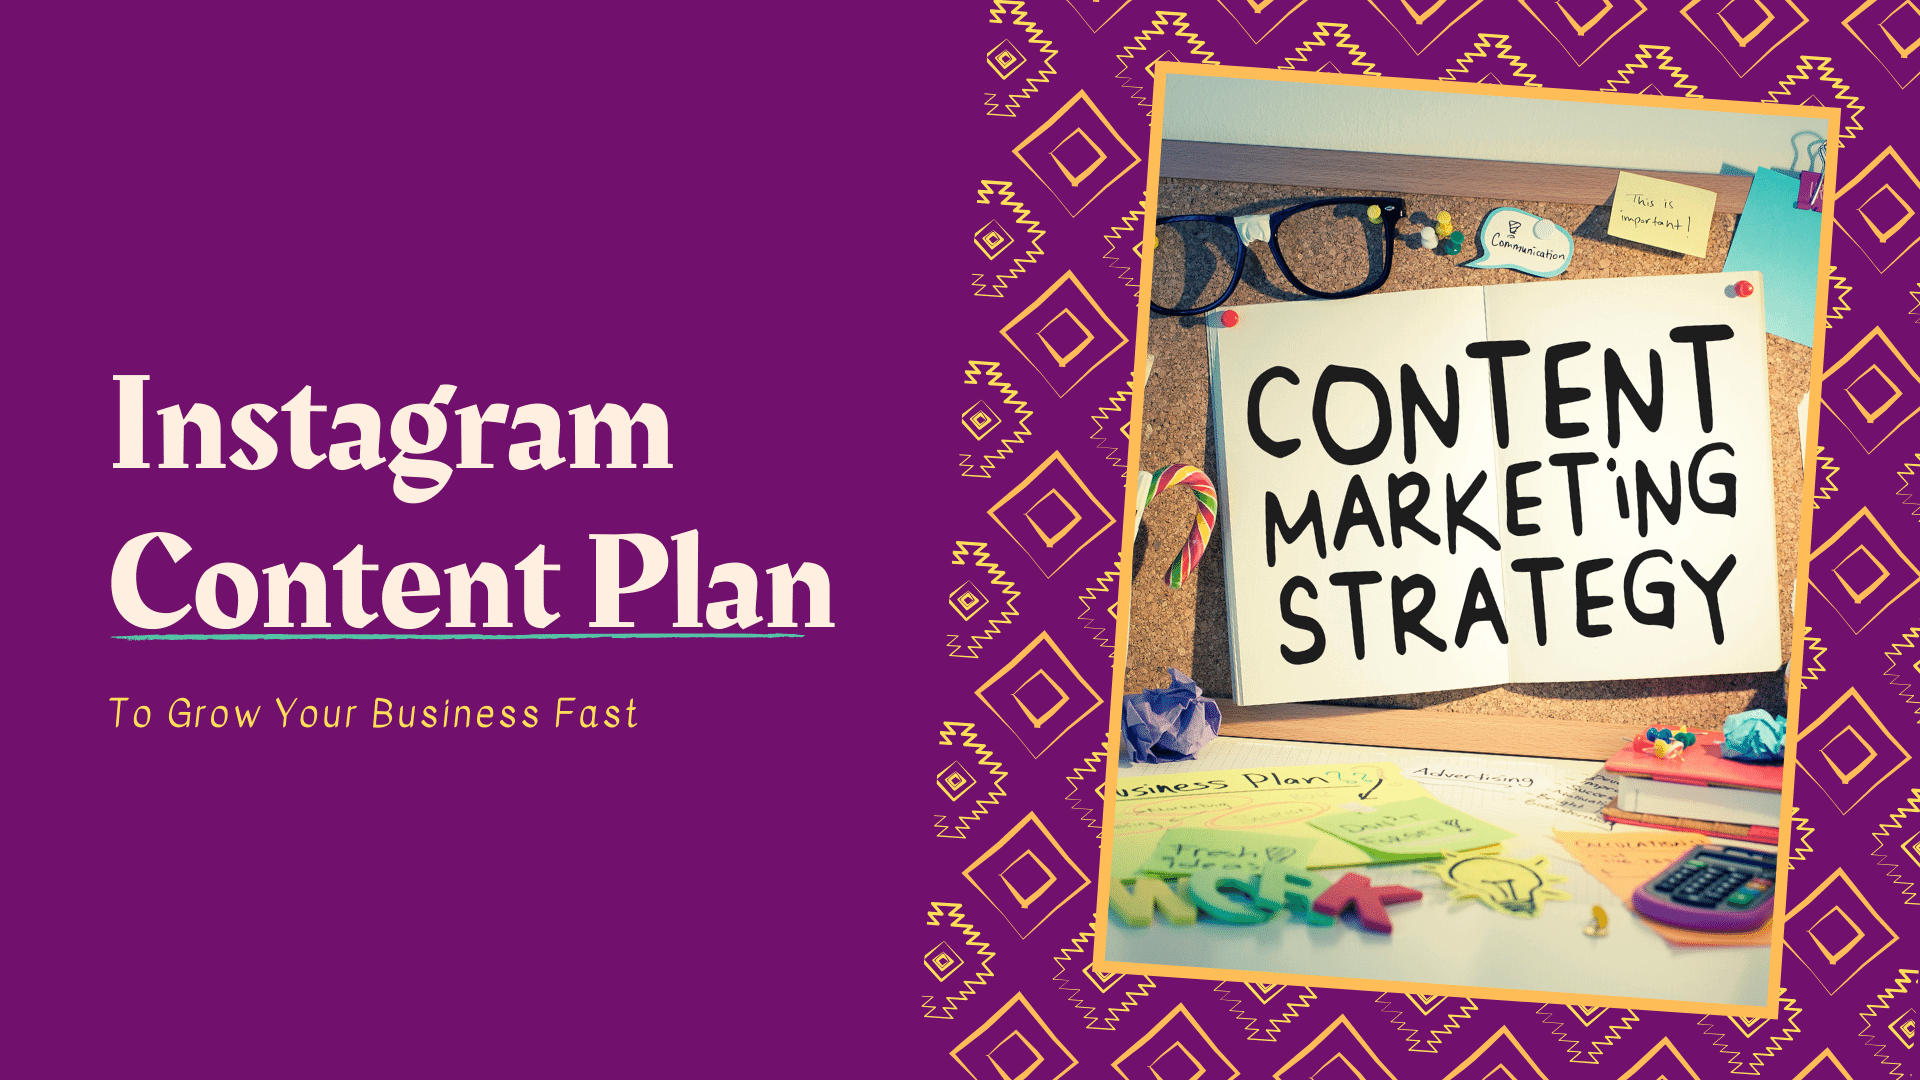 Instagram content plan for business